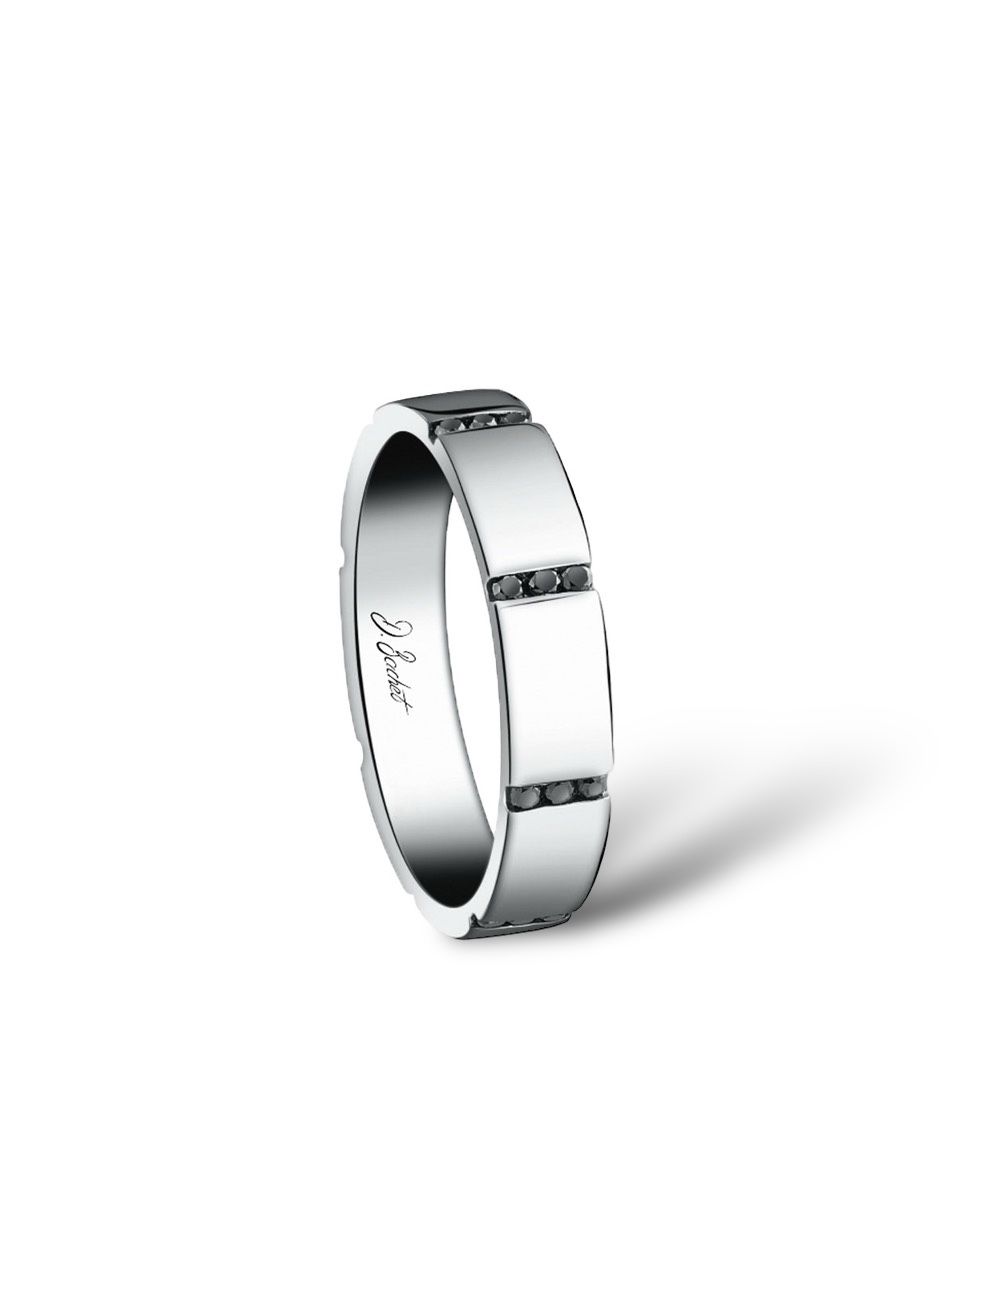 Luxury men's wedding band with 8 rows of black diamonds, symbolizing the eternal union of two souls.